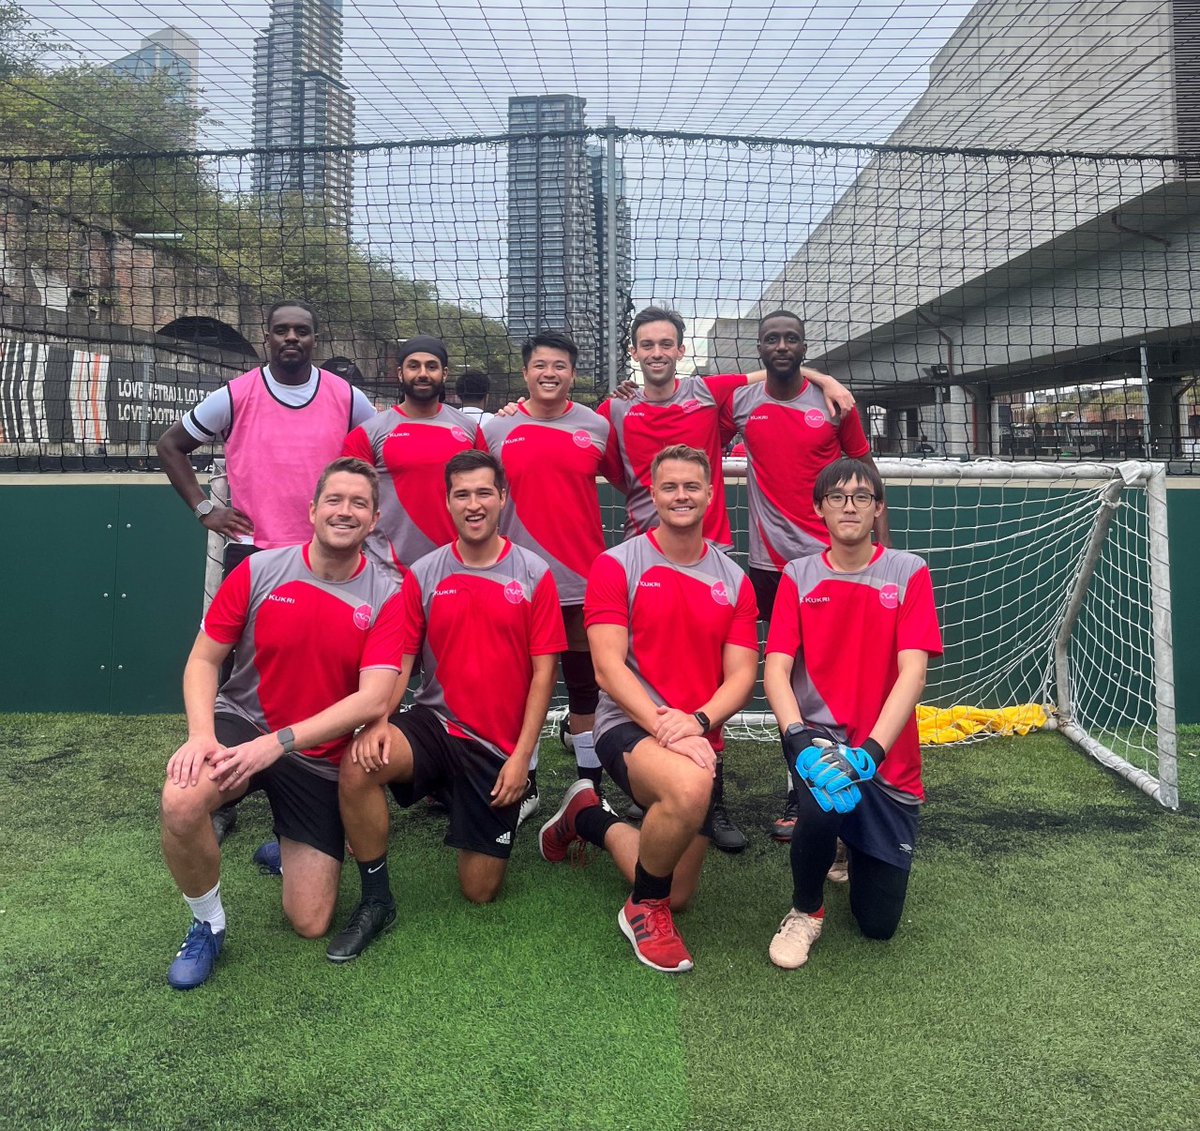 Well done to our London football squad for taking part in the CBW/Gravita 5-a-side charity football tournament yesterday! The event raised over £1,400 for the #LittleHavens Children's Hospice. ⚽️🙌👏@HavensHospices @TeamGravita